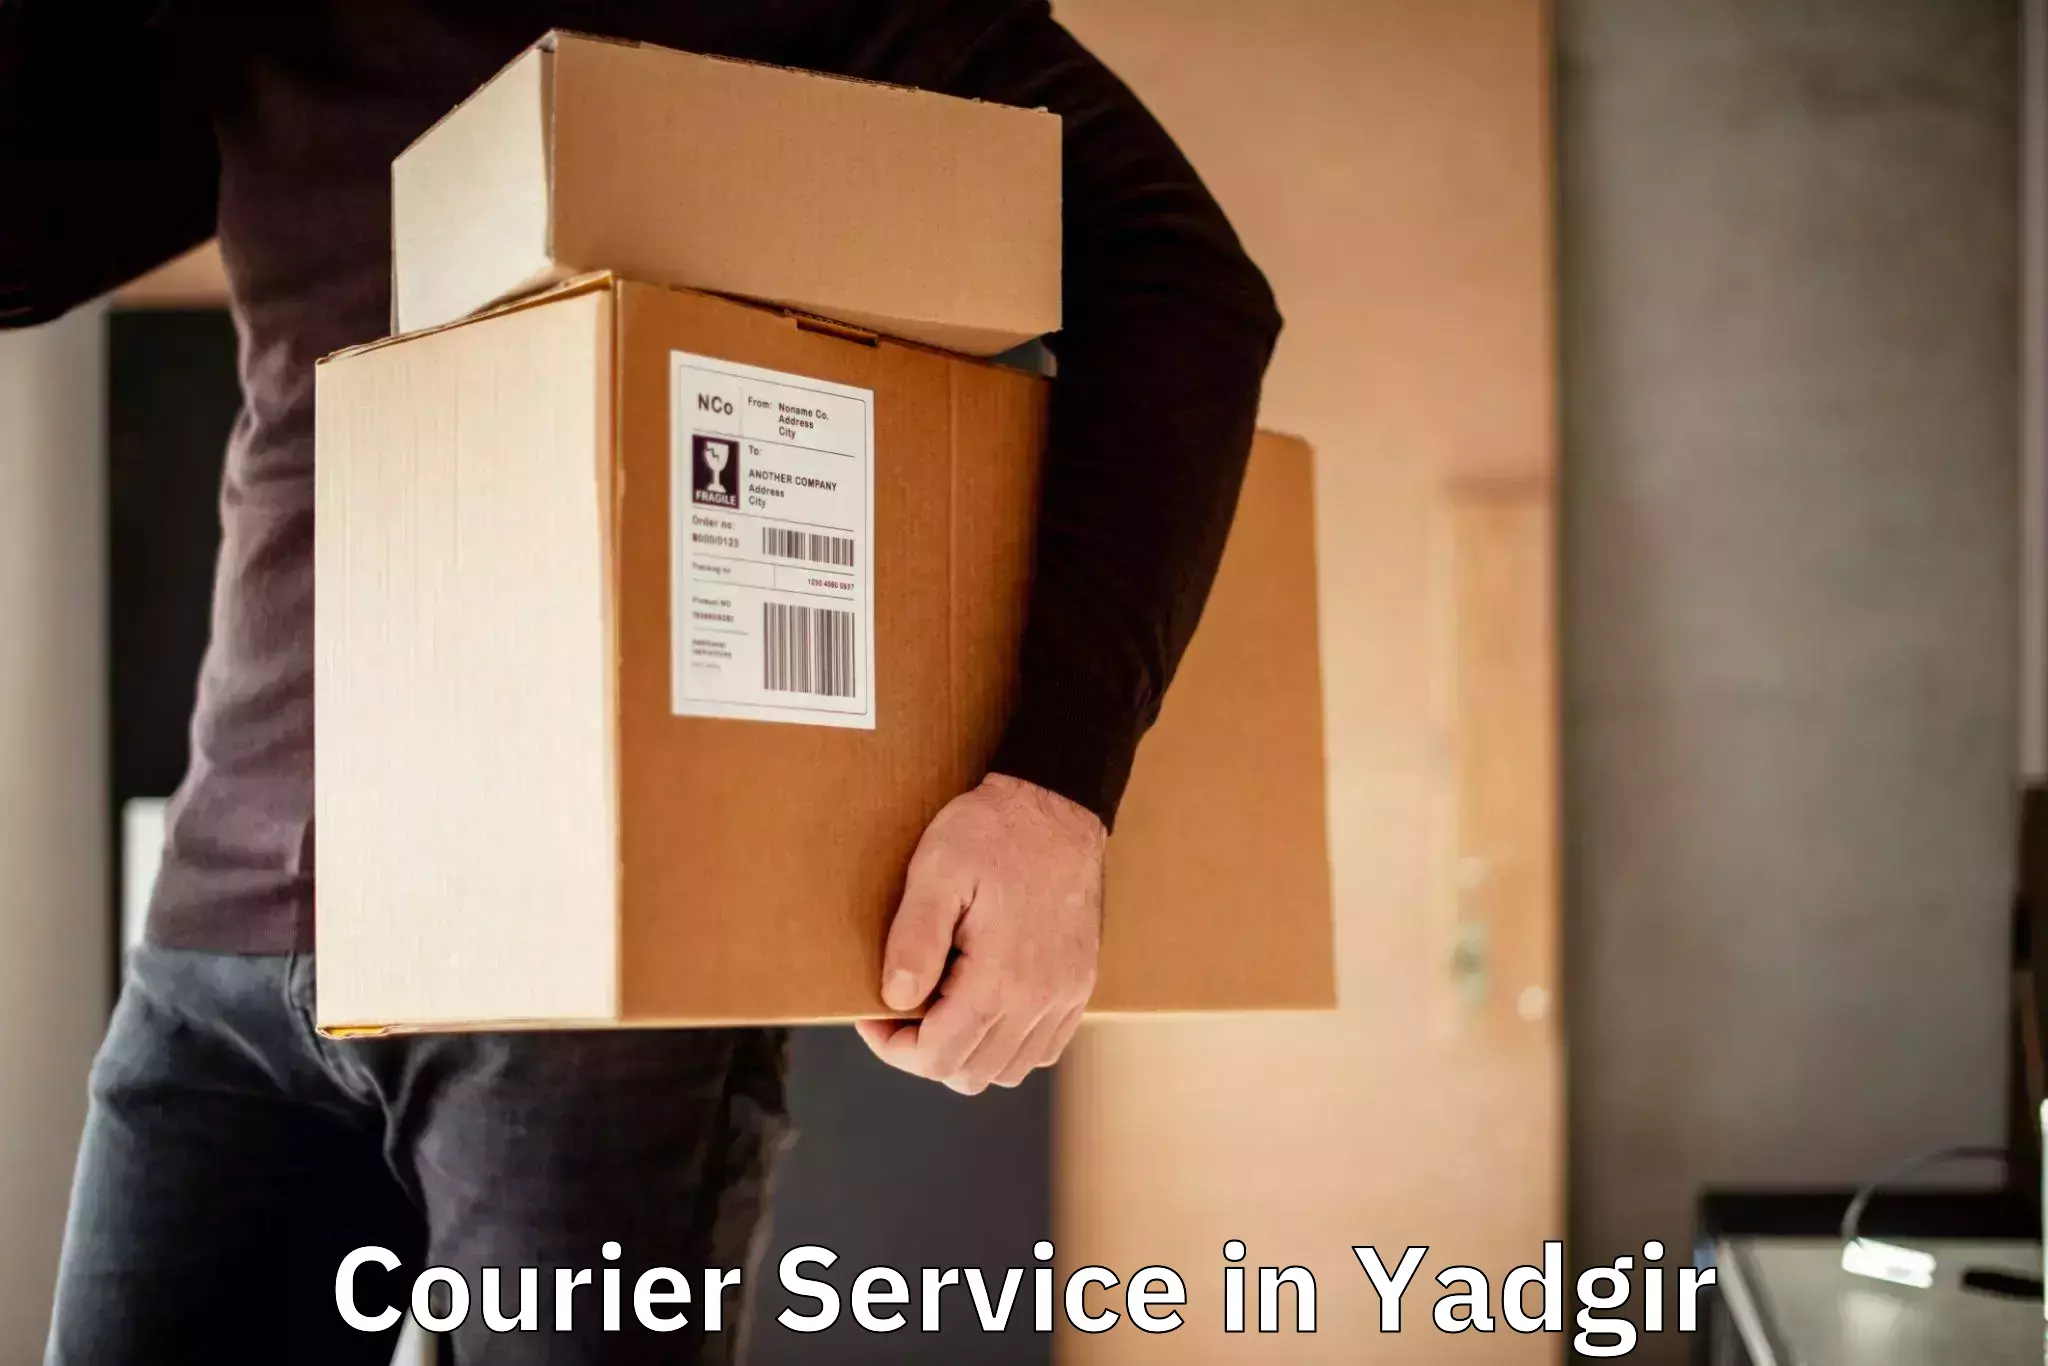 Nationwide parcel services in Yadgir